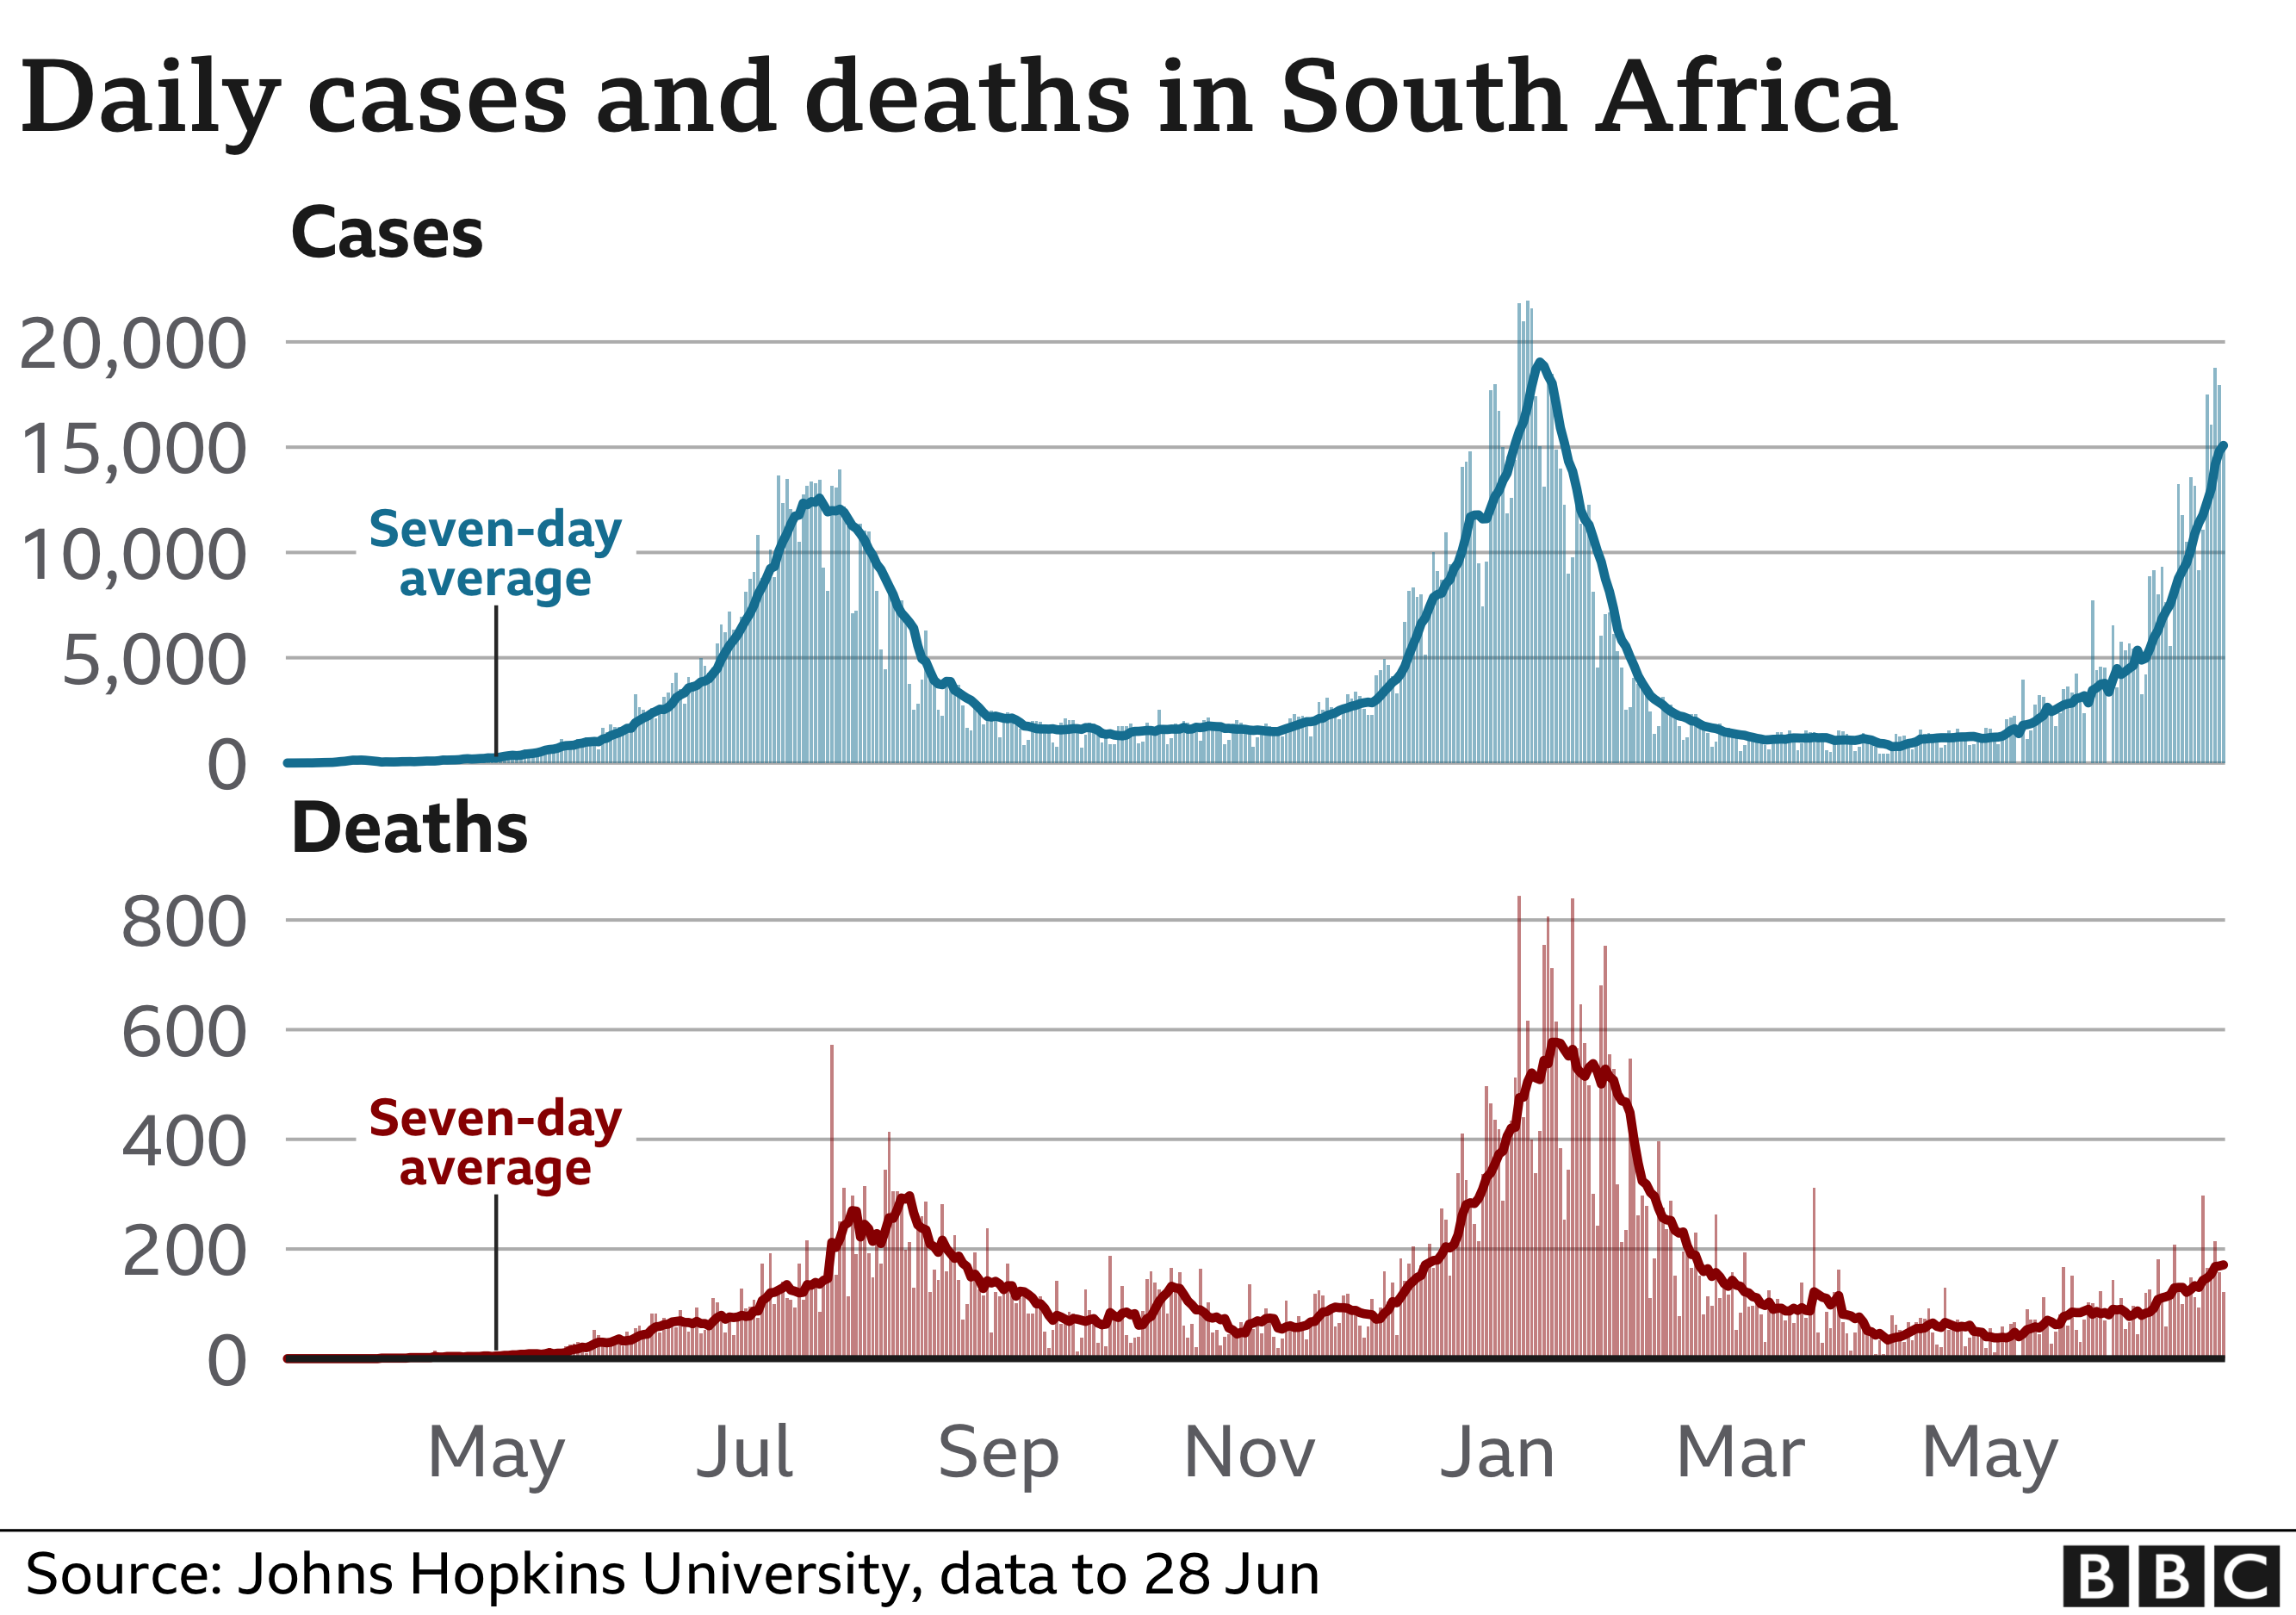 A chart showing the number of coronavirus deaths and cases in South Africa over 12 months